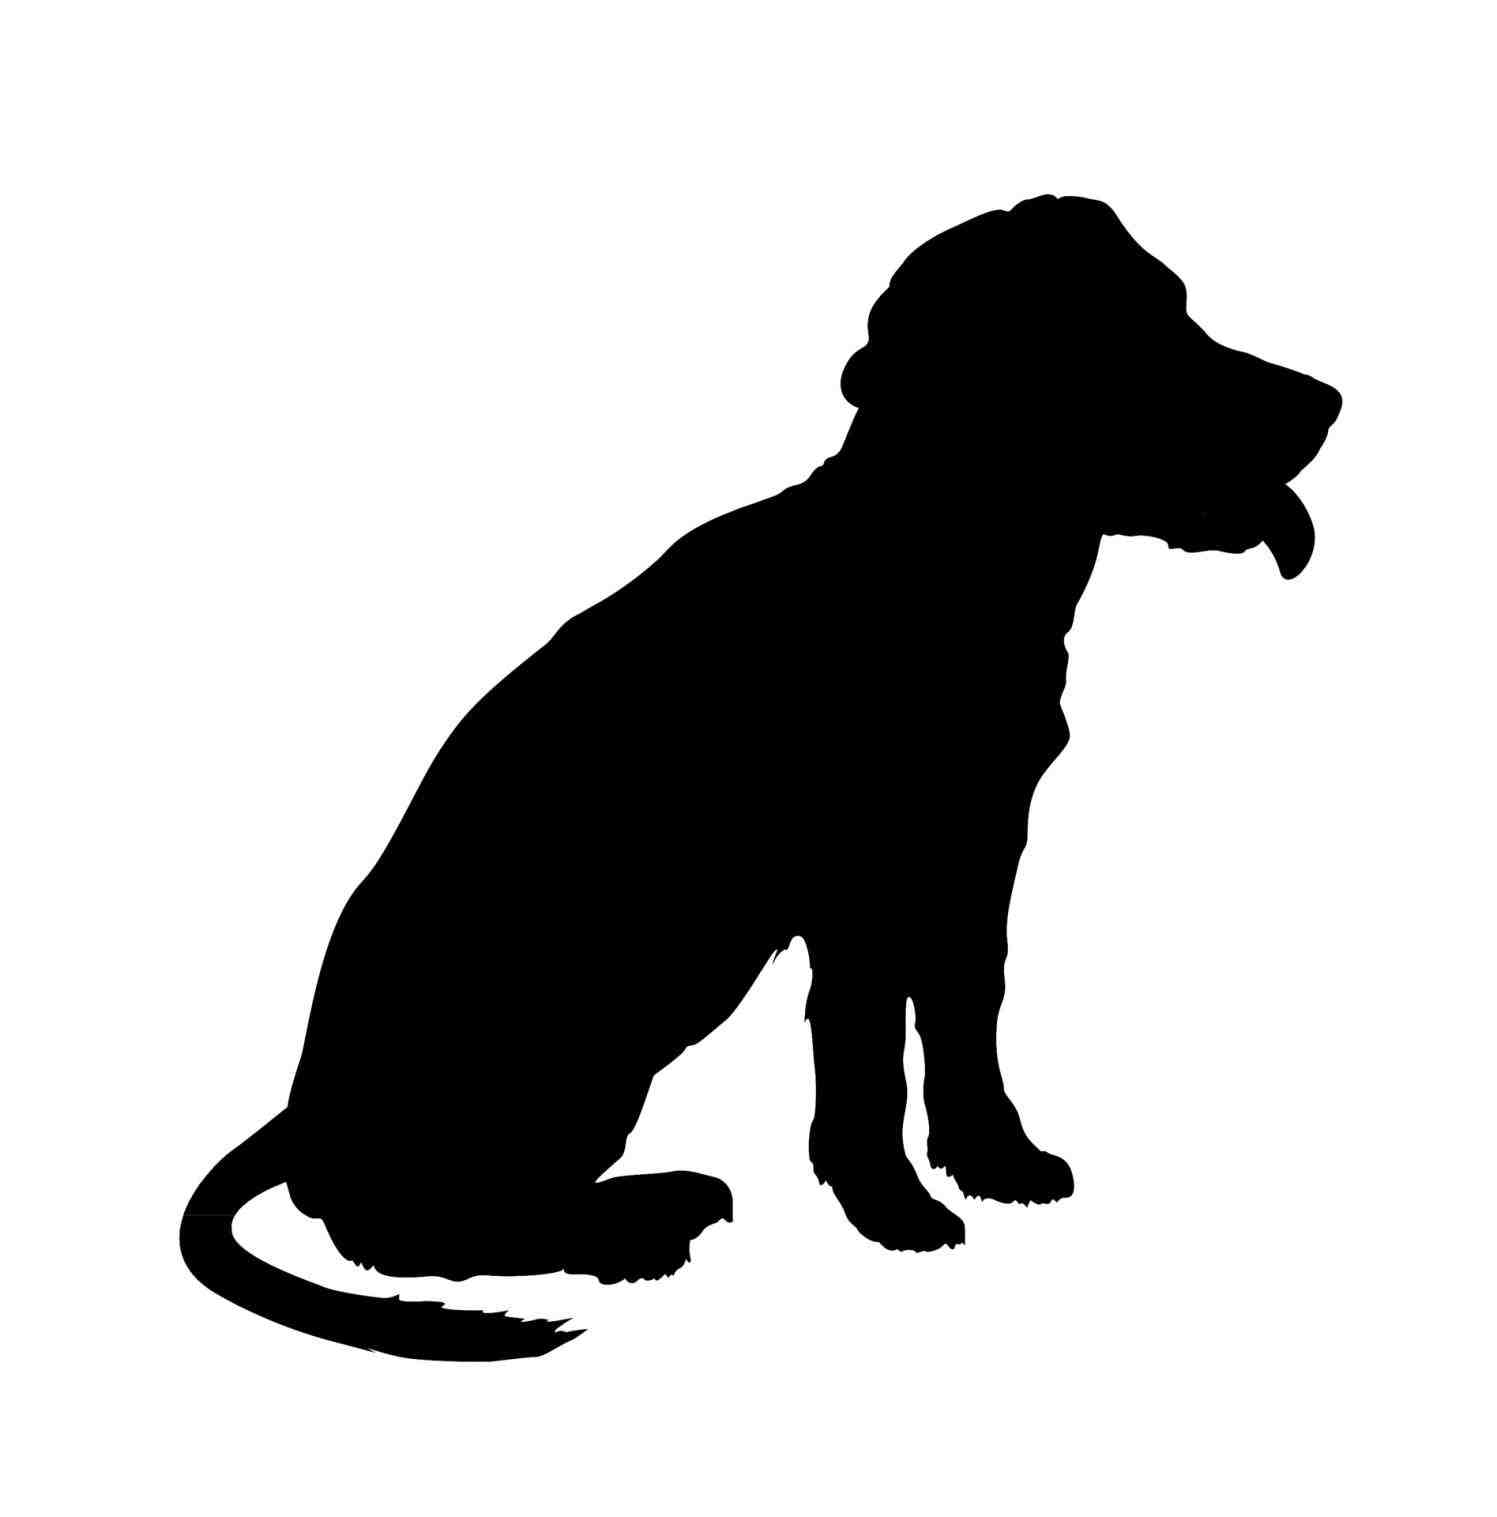 Download Border Collie Silhouette Clip Art at GetDrawings.com ...